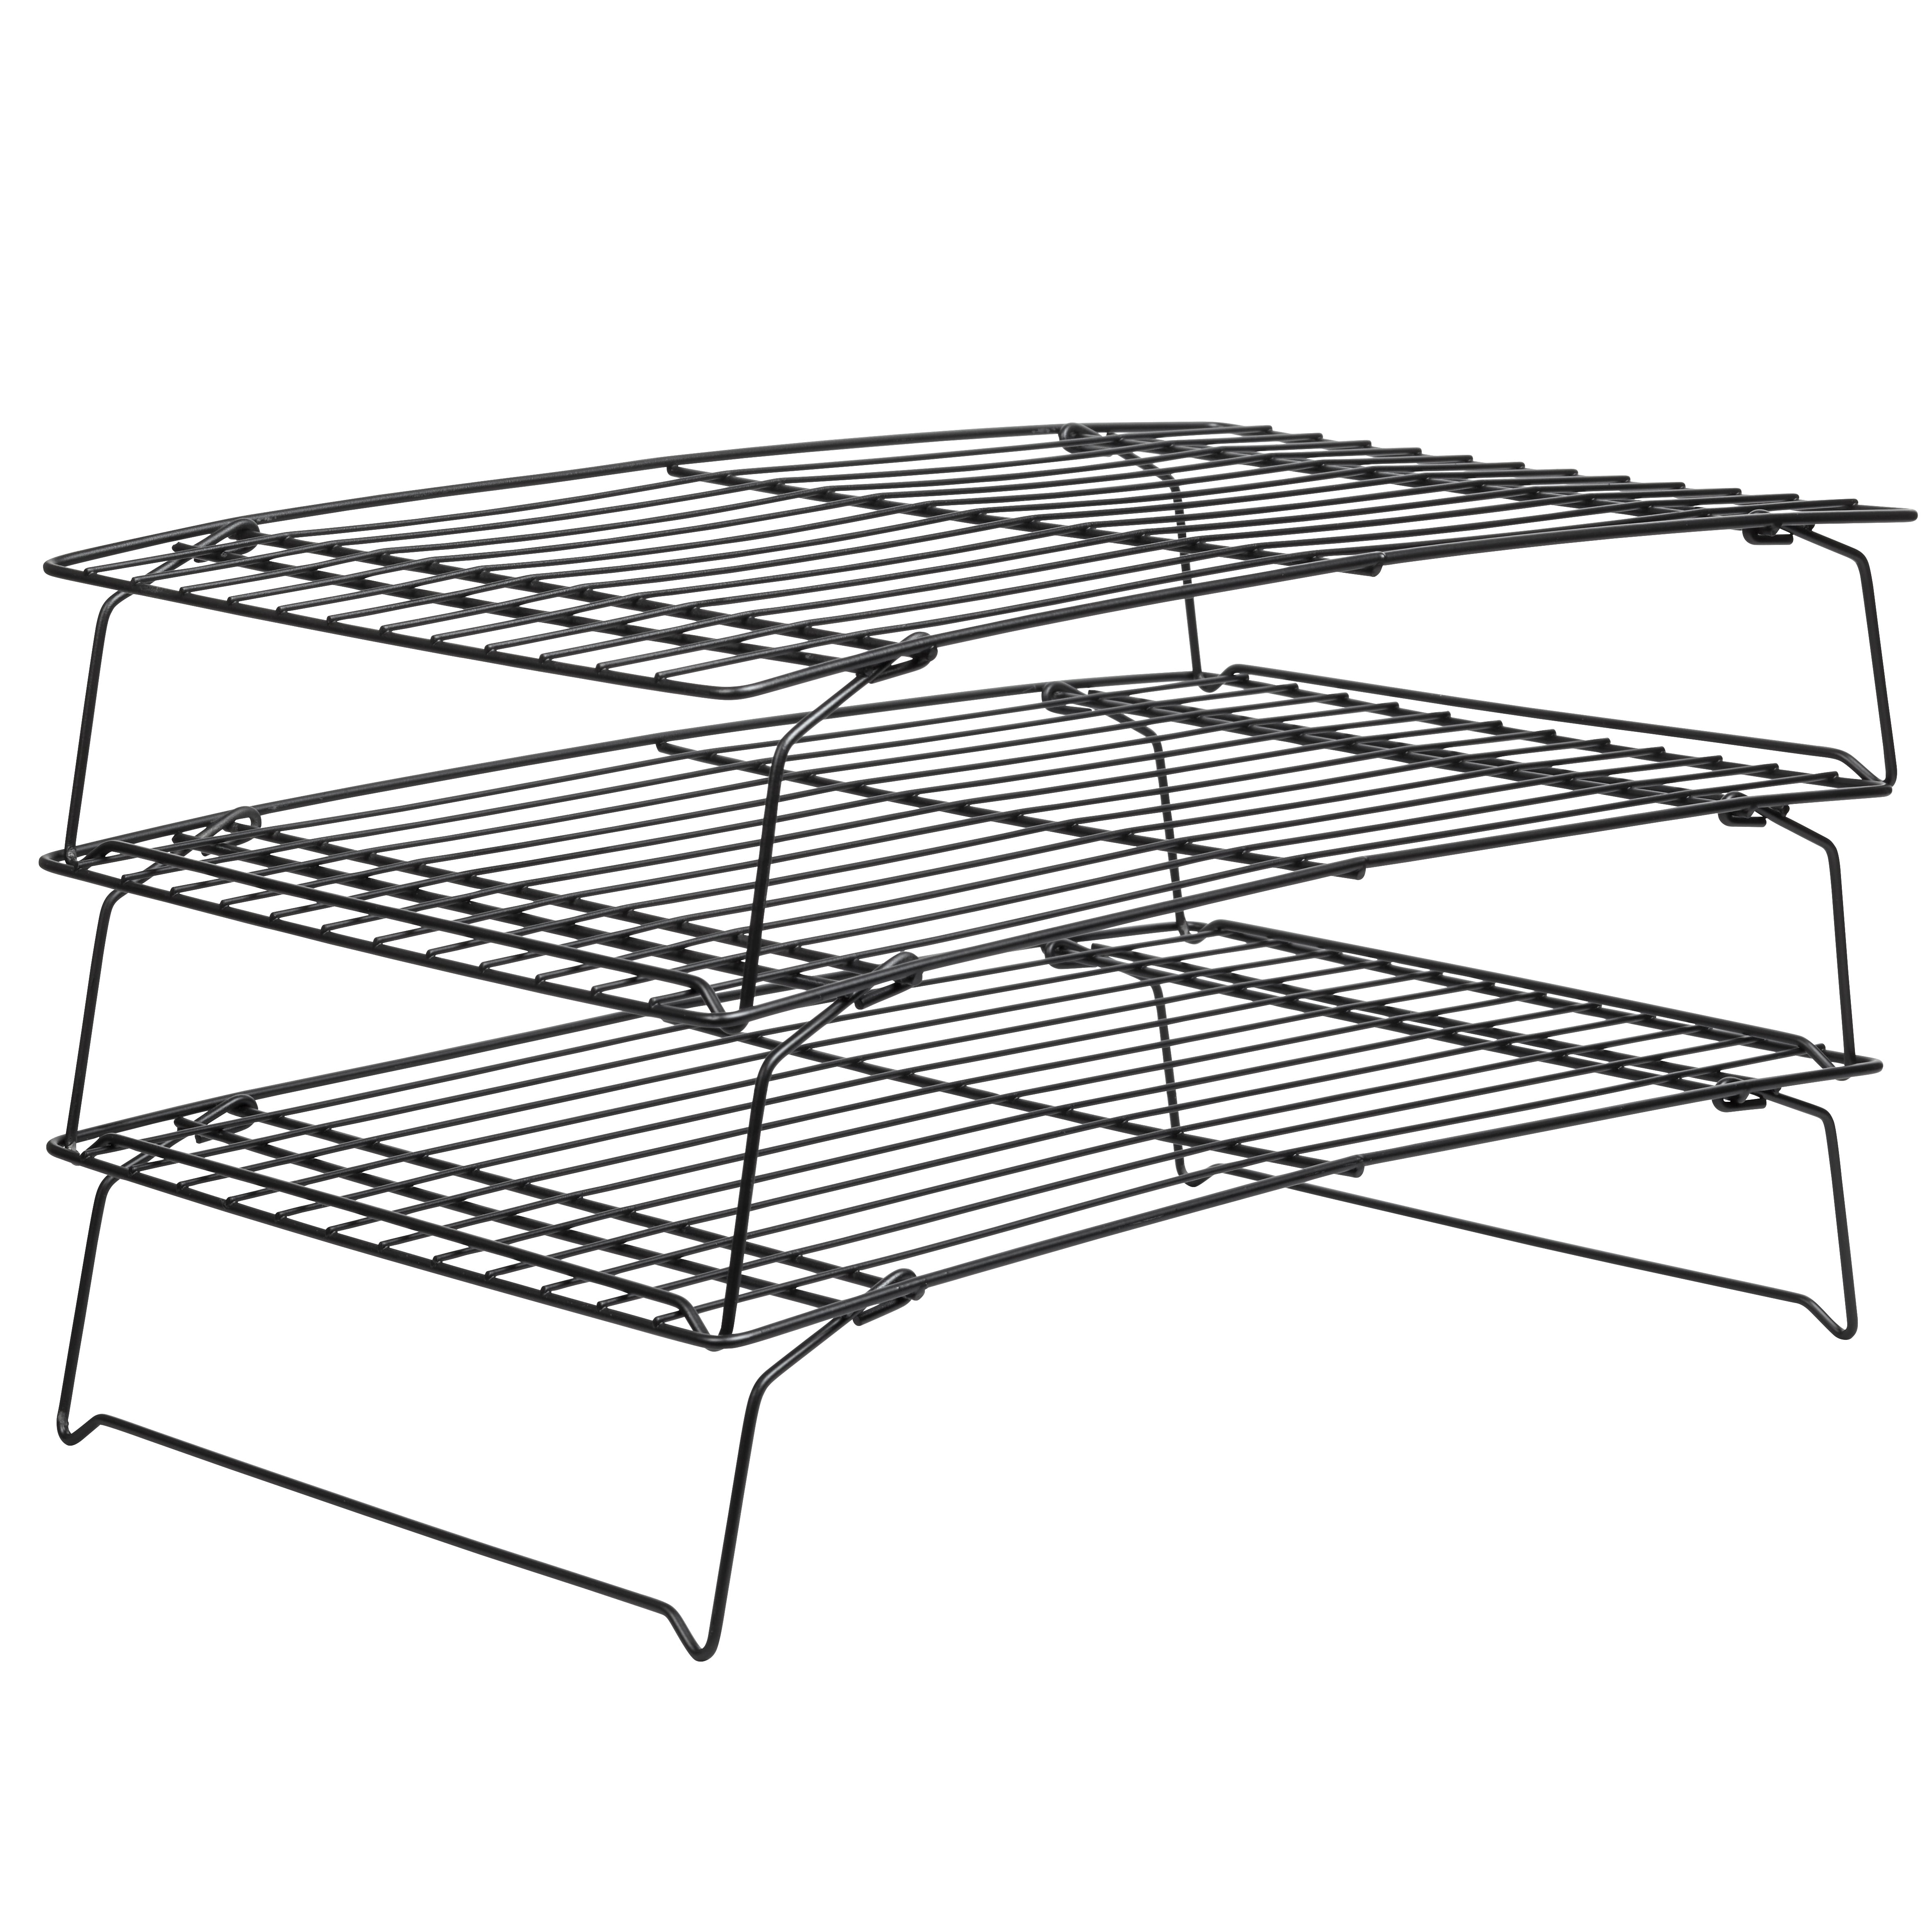 Wilton 2105-459 Excelle Elite 3-Tier Cooling Rack by Wilton 